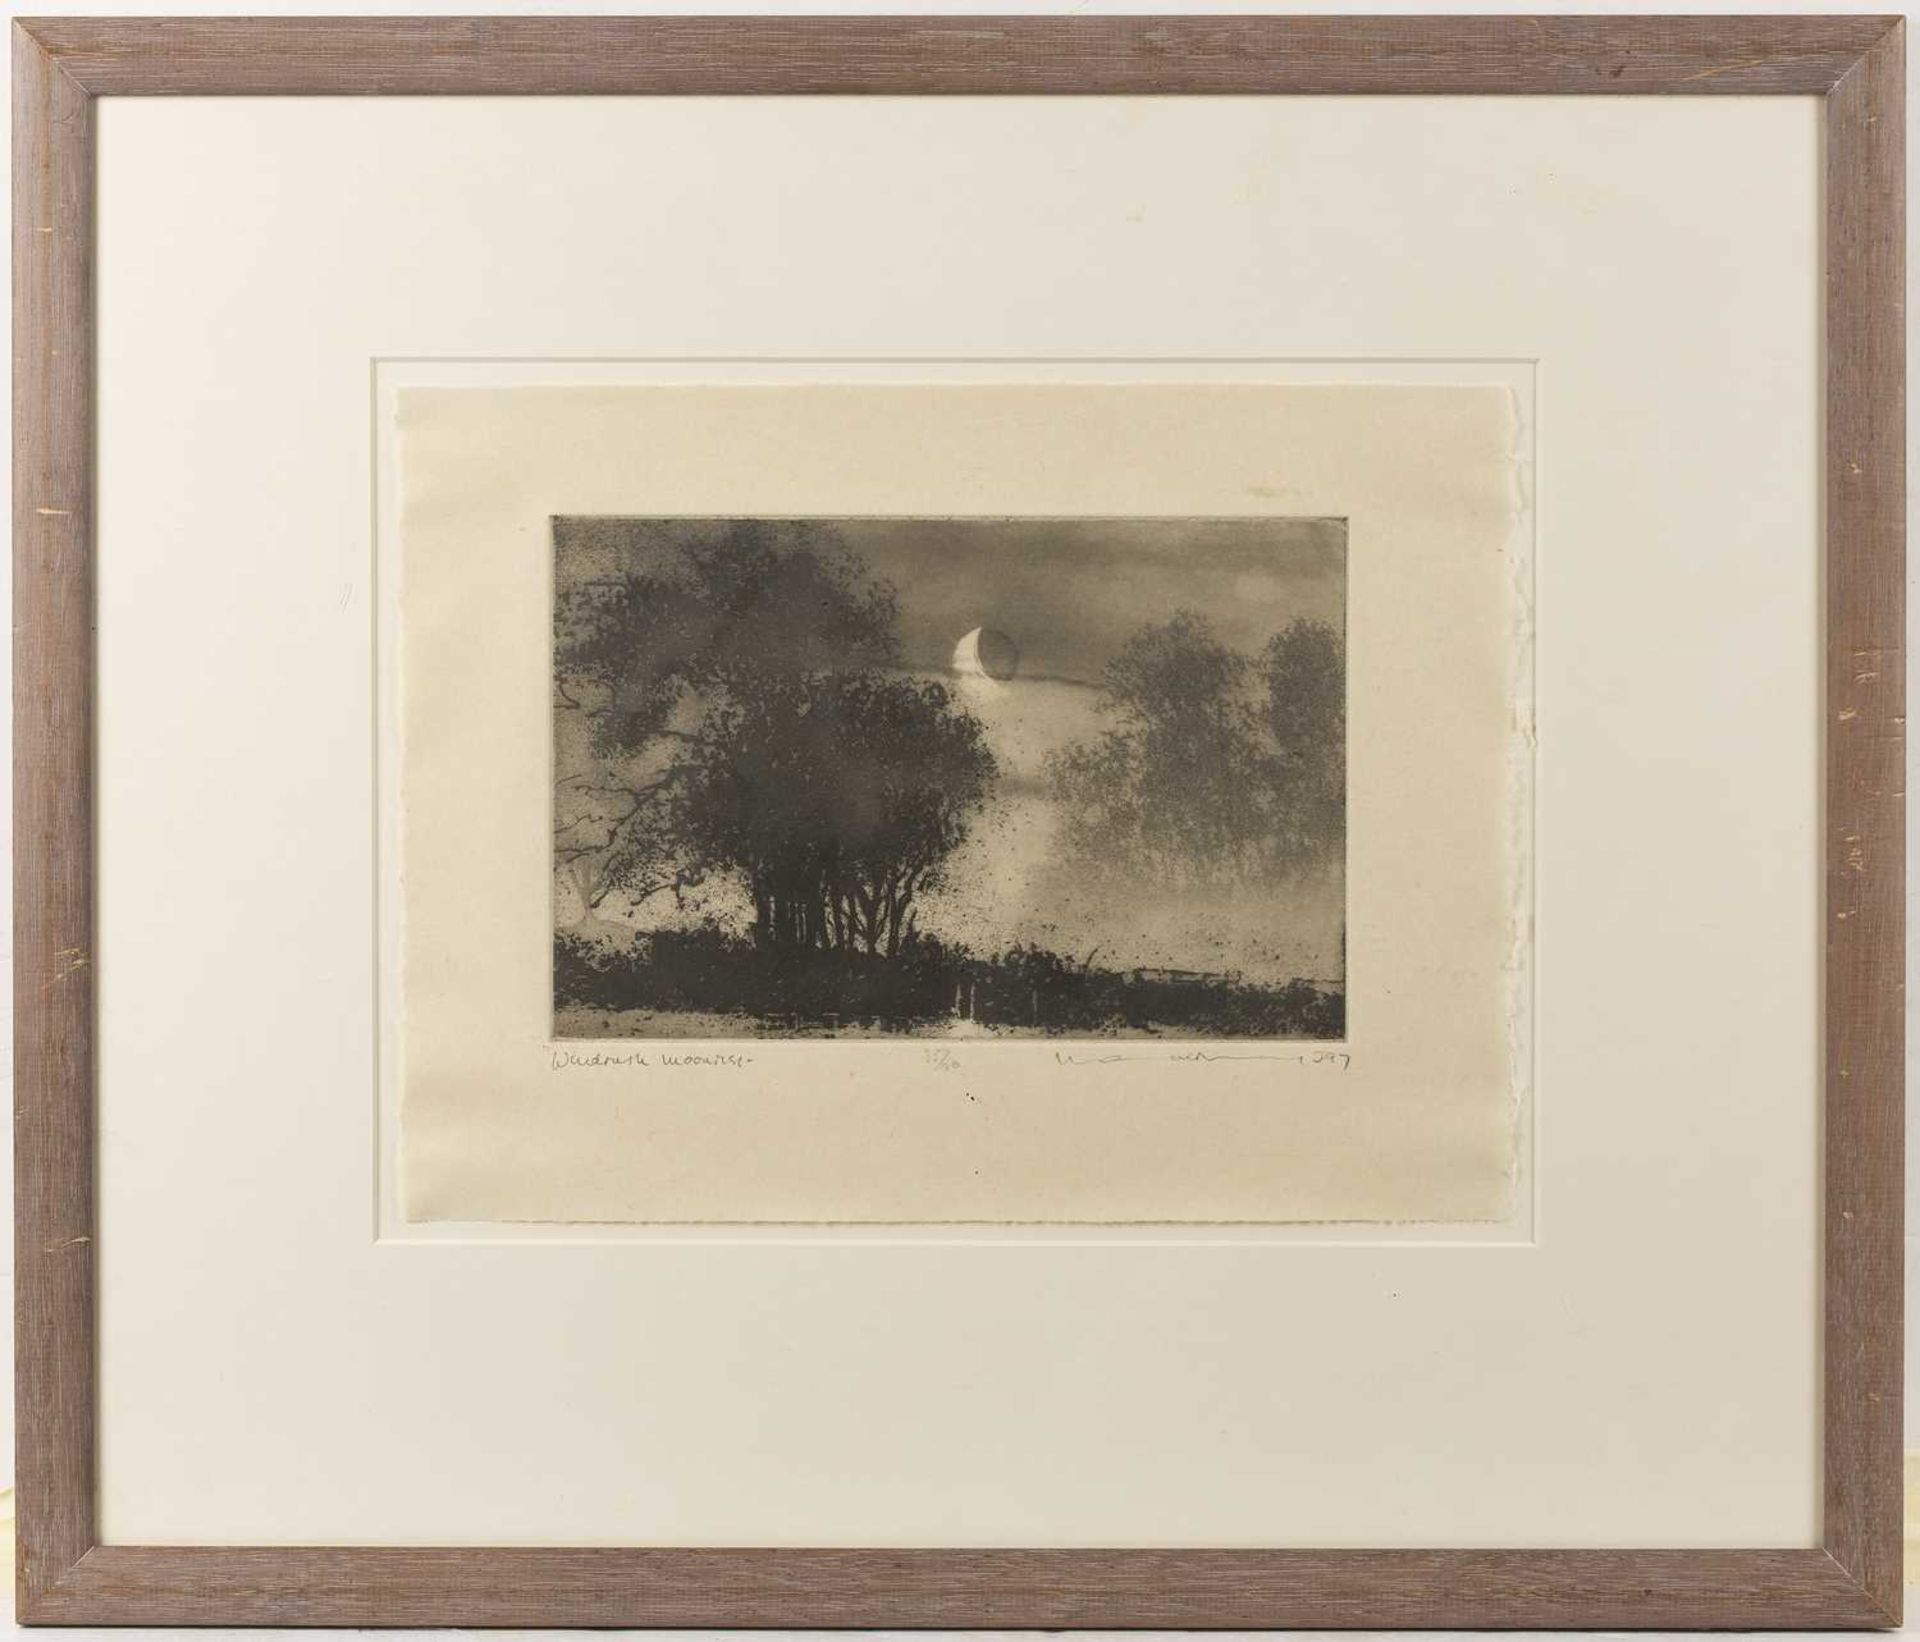 Norman Ackroyd (b.1938) Windrush Moonrise, 1997 35/90, signed, titled, dated, and numbered in pencil - Image 2 of 3